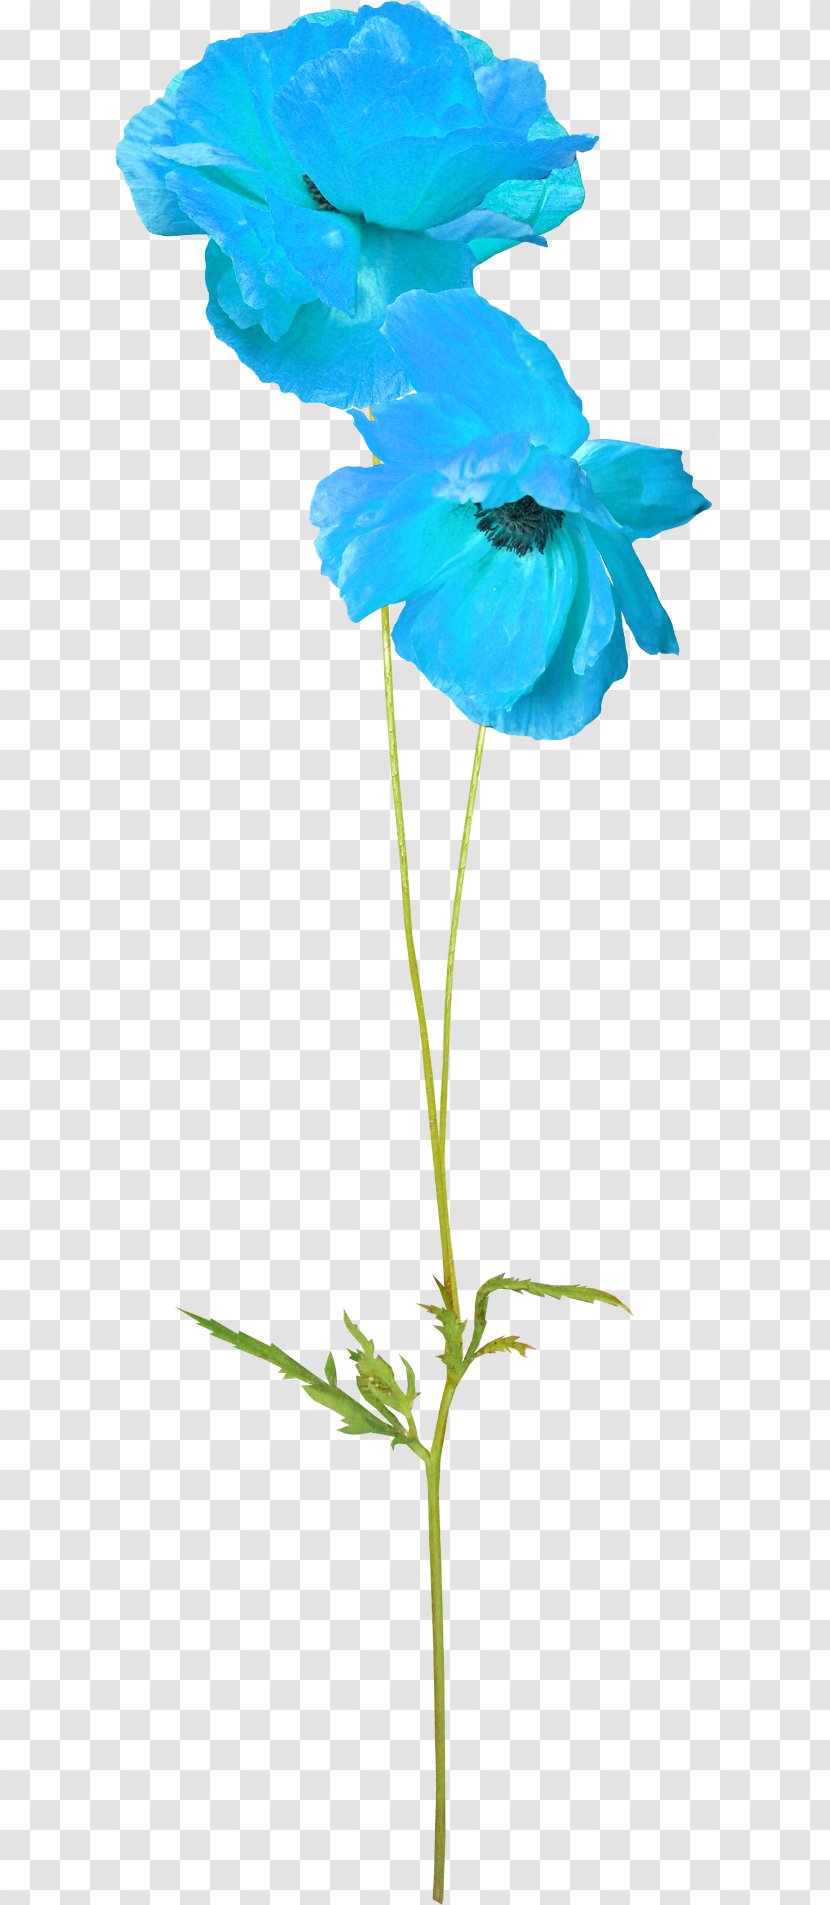 Flower Graphic Design - Flowering Plant - Painted Flowers Transparent PNG